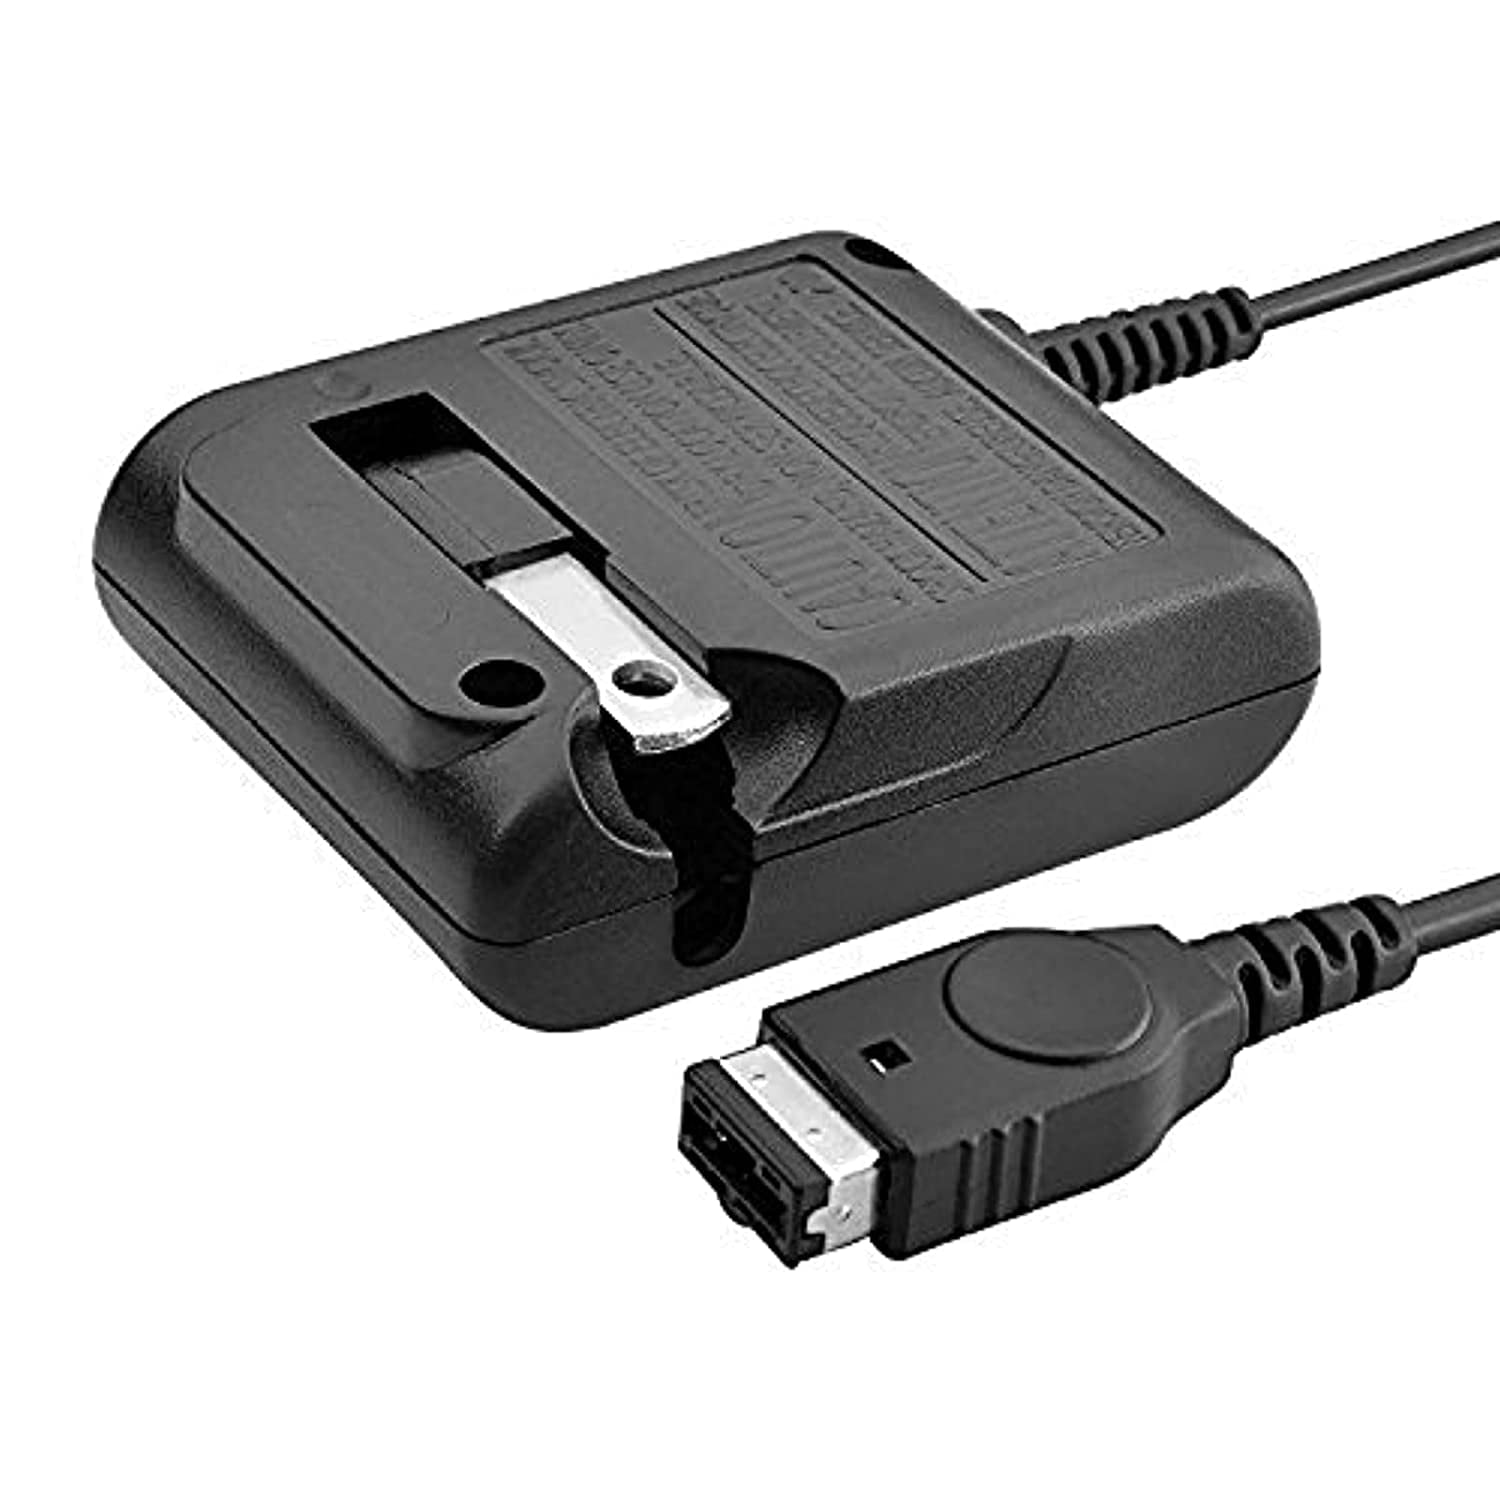  Xahpower Charger for Gameboy Advance sp, GBA SP Charger Cable  Cord for Nintendo DS Original Console(NDS)/Game Boy Advance SP : Xahpower:  Video Games